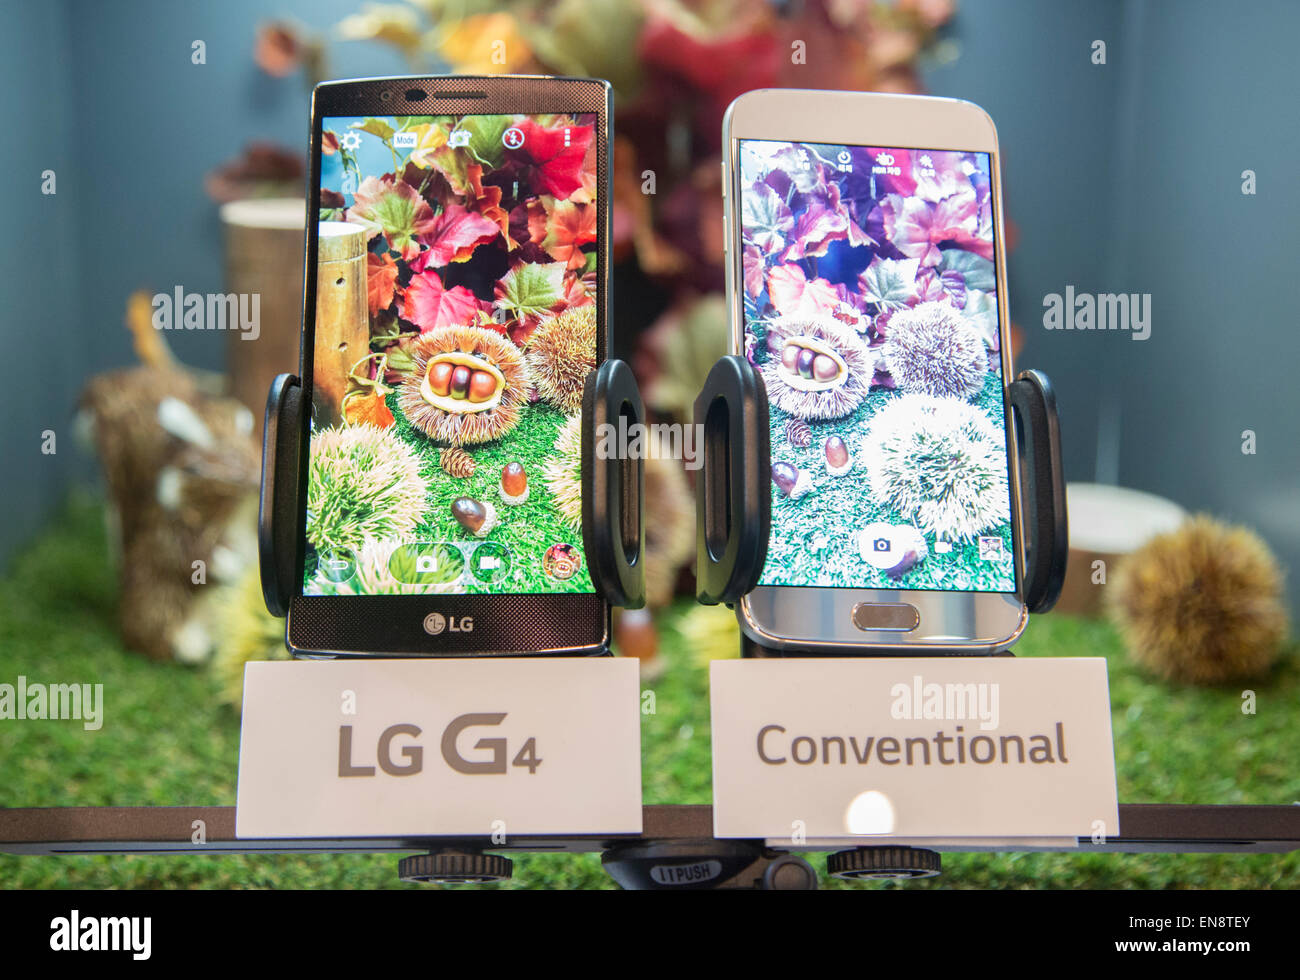 Seoul, South Korea. 29th April, 2015. LG Electronics' G4 smartphone (L) and Samsung's Galaxy S6 are displayed during a showcase of LG G4 in Seoul, South Korea. LG showcased its new G4 on Wednesday, that is equipped with 5.5-inch in-plane switching (IPS) QHD display, a Qualcomm Snapdragon 808 Processor with X10 LTE and a F 1.8 camera lens. The new smartphone runs on Google's Android 5.1 Lollipop and its local price is about US$770, according to local media. Credit:  Lee Jae-Won/AFLO/Alamy Live News Stock Photo